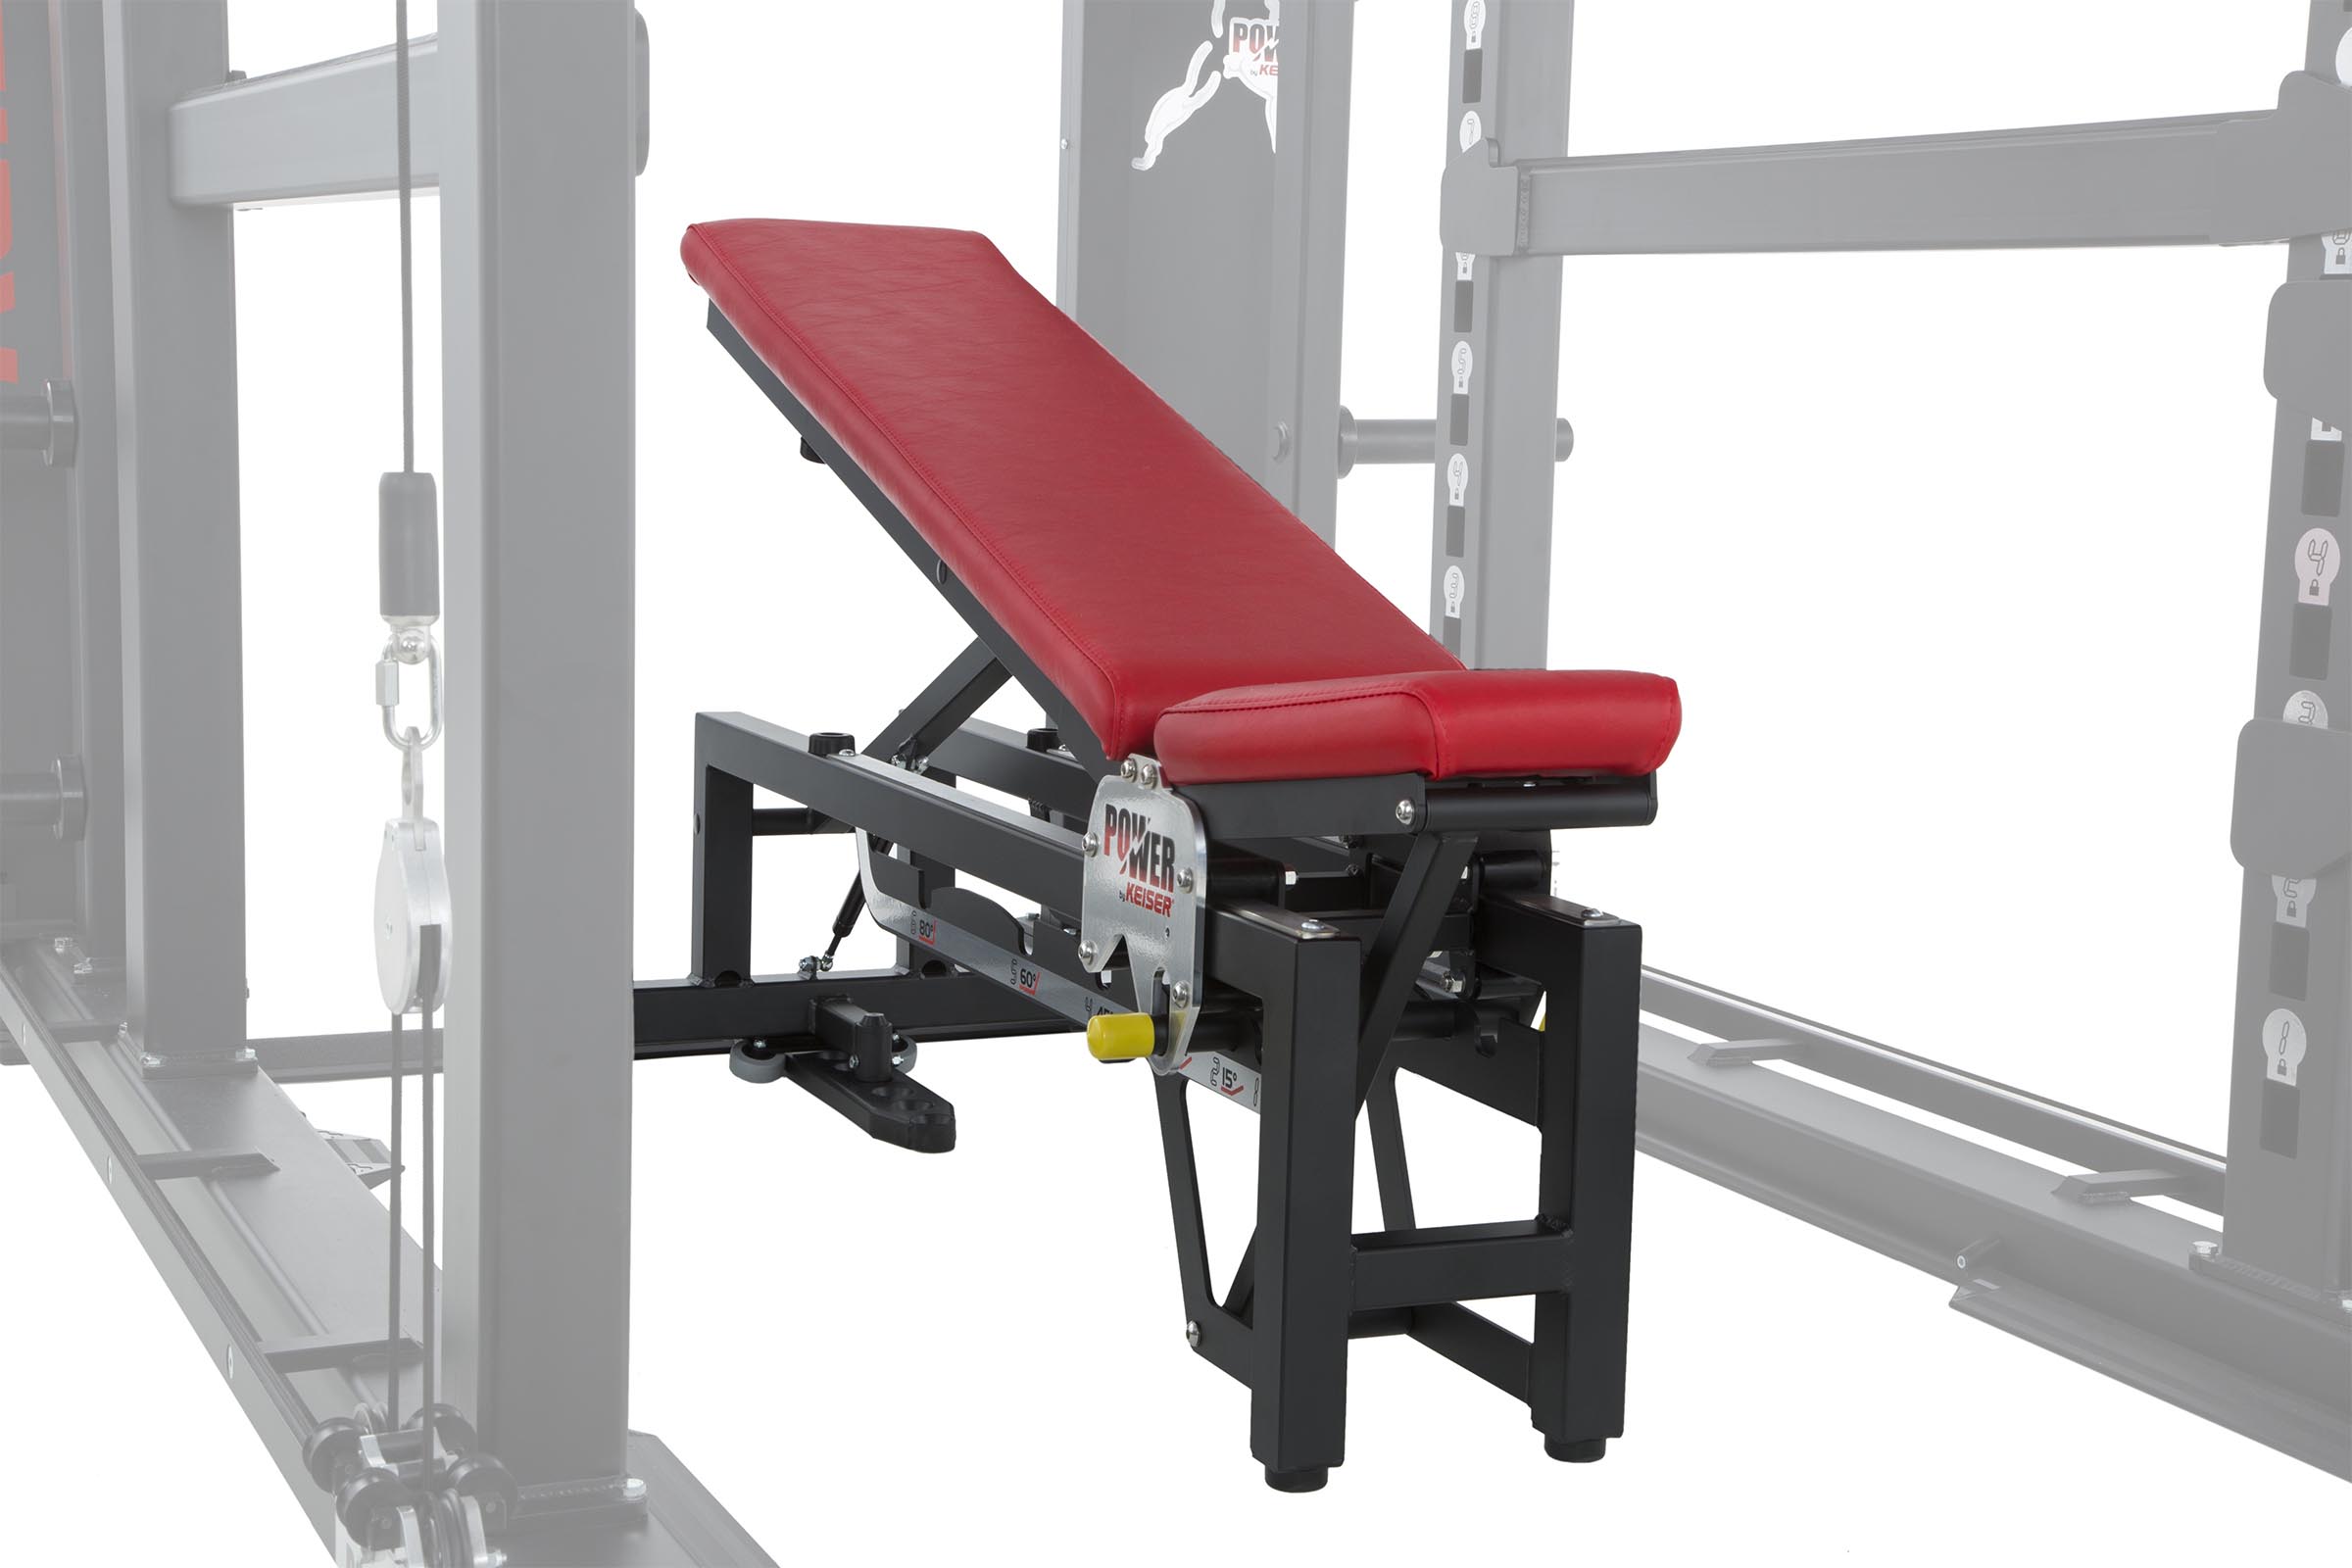 Keiser Accessory Bench 0595